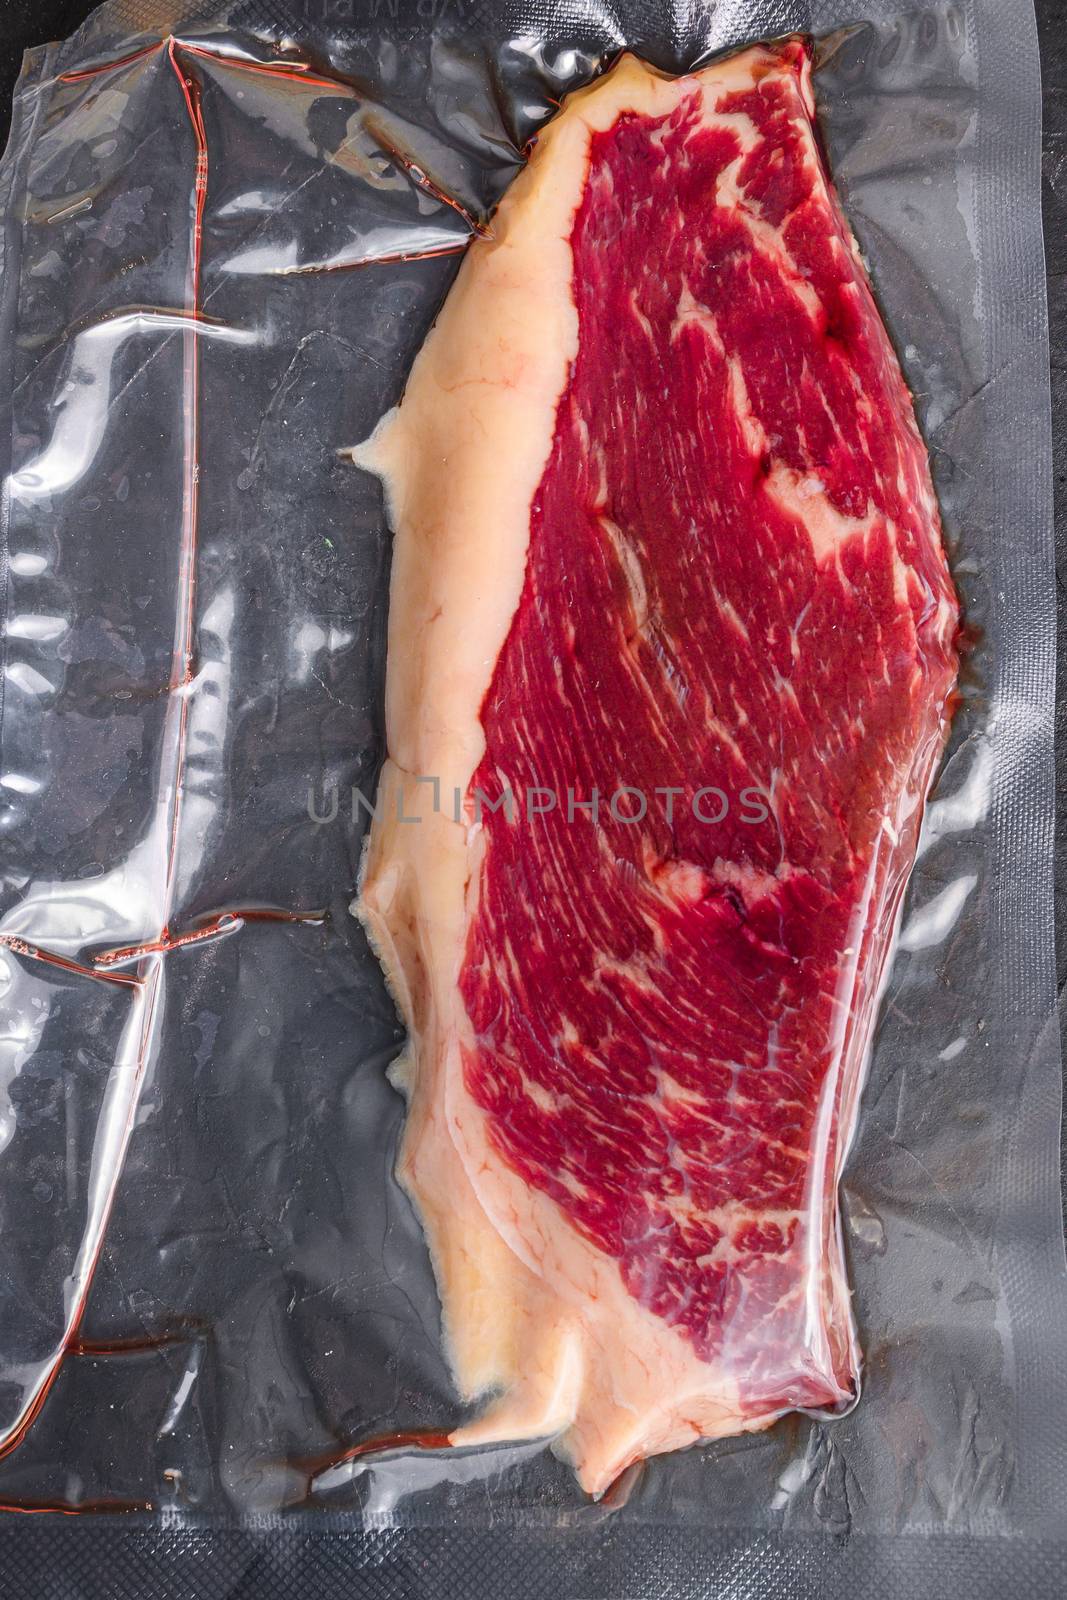 Picanha beef steak for sous vide cooking on black stone background, top view. by Ilianesolenyi